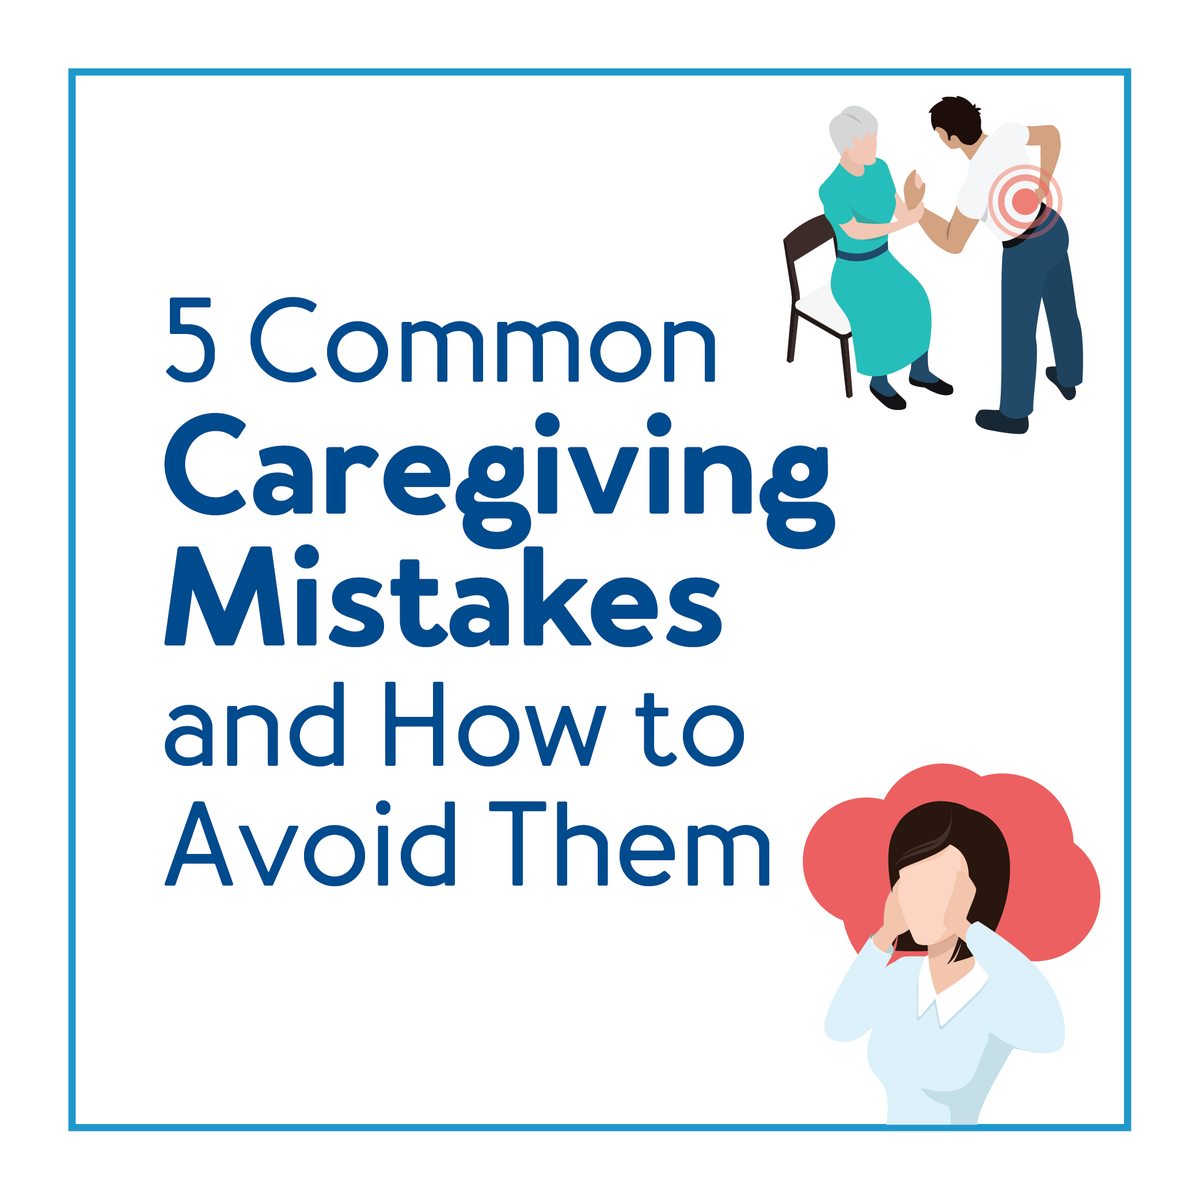 Cartoon people with text, “Five common cargiving mistakes and how to avoid them